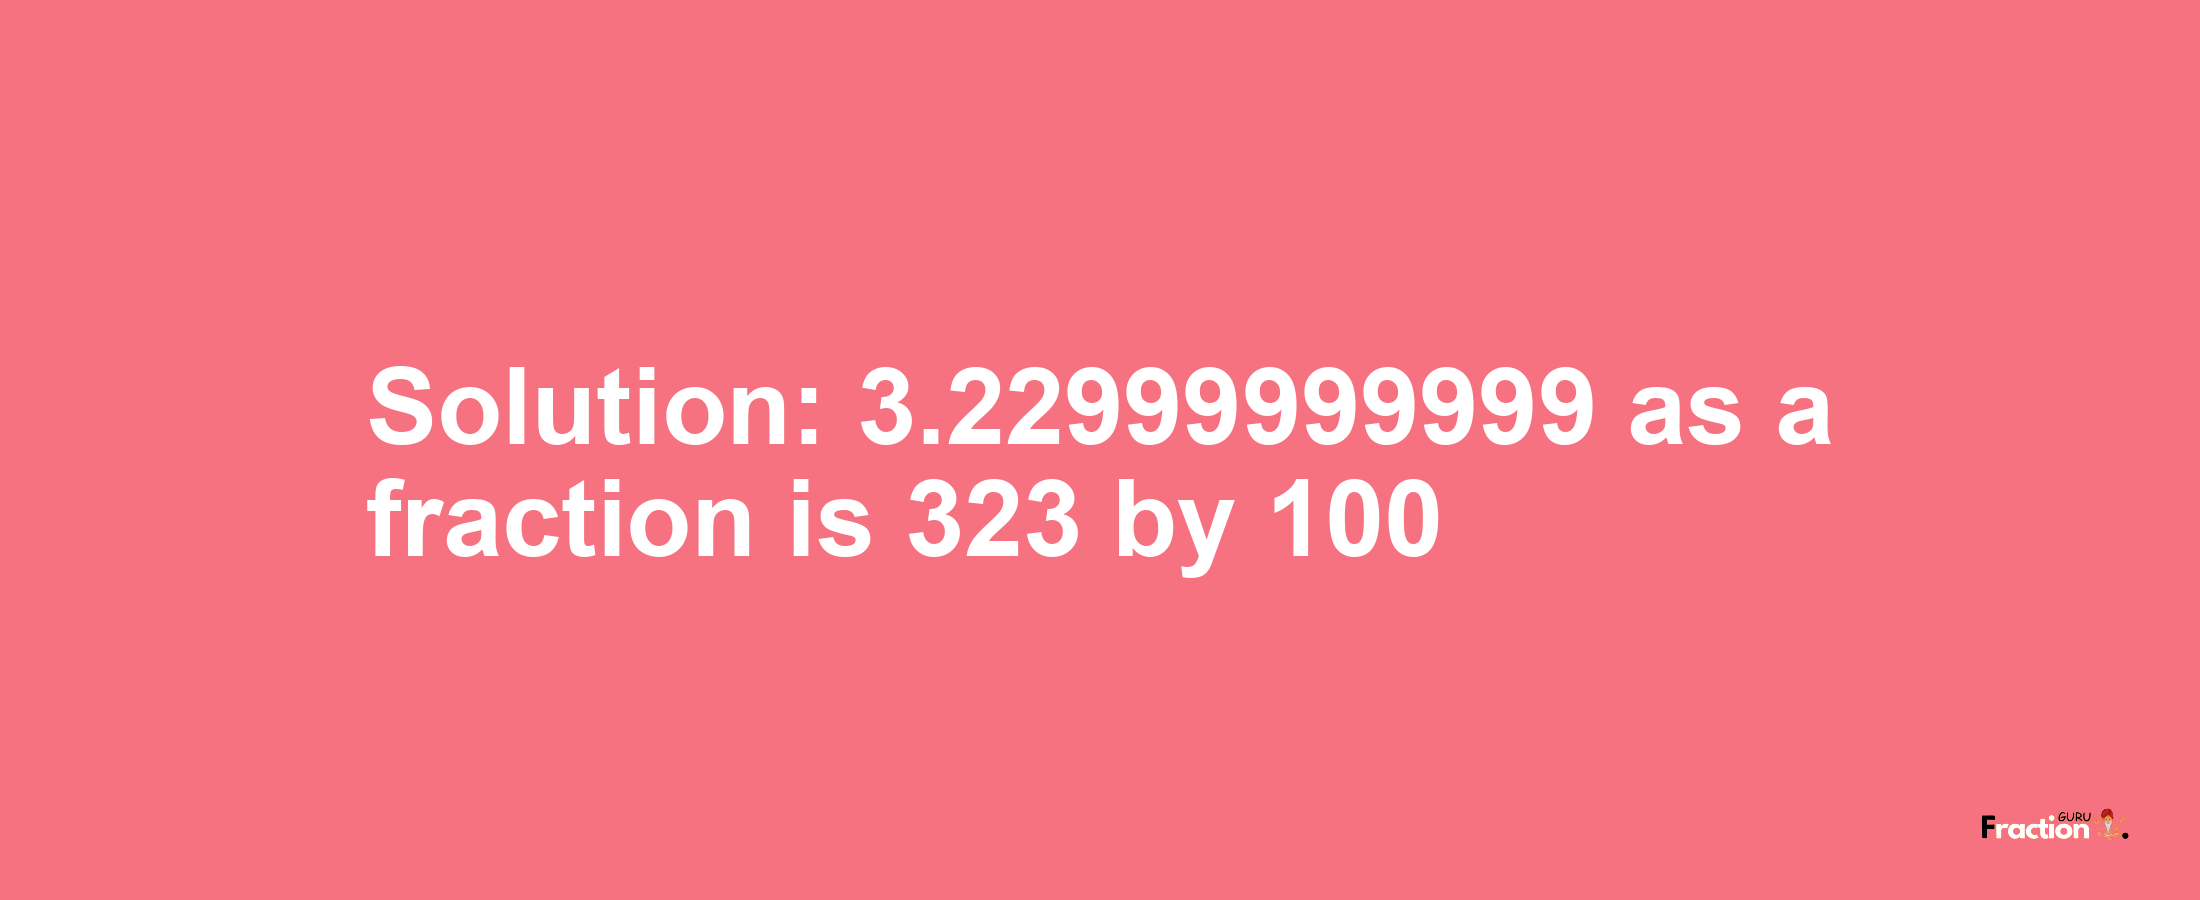 Solution:3.22999999999 as a fraction is 323/100